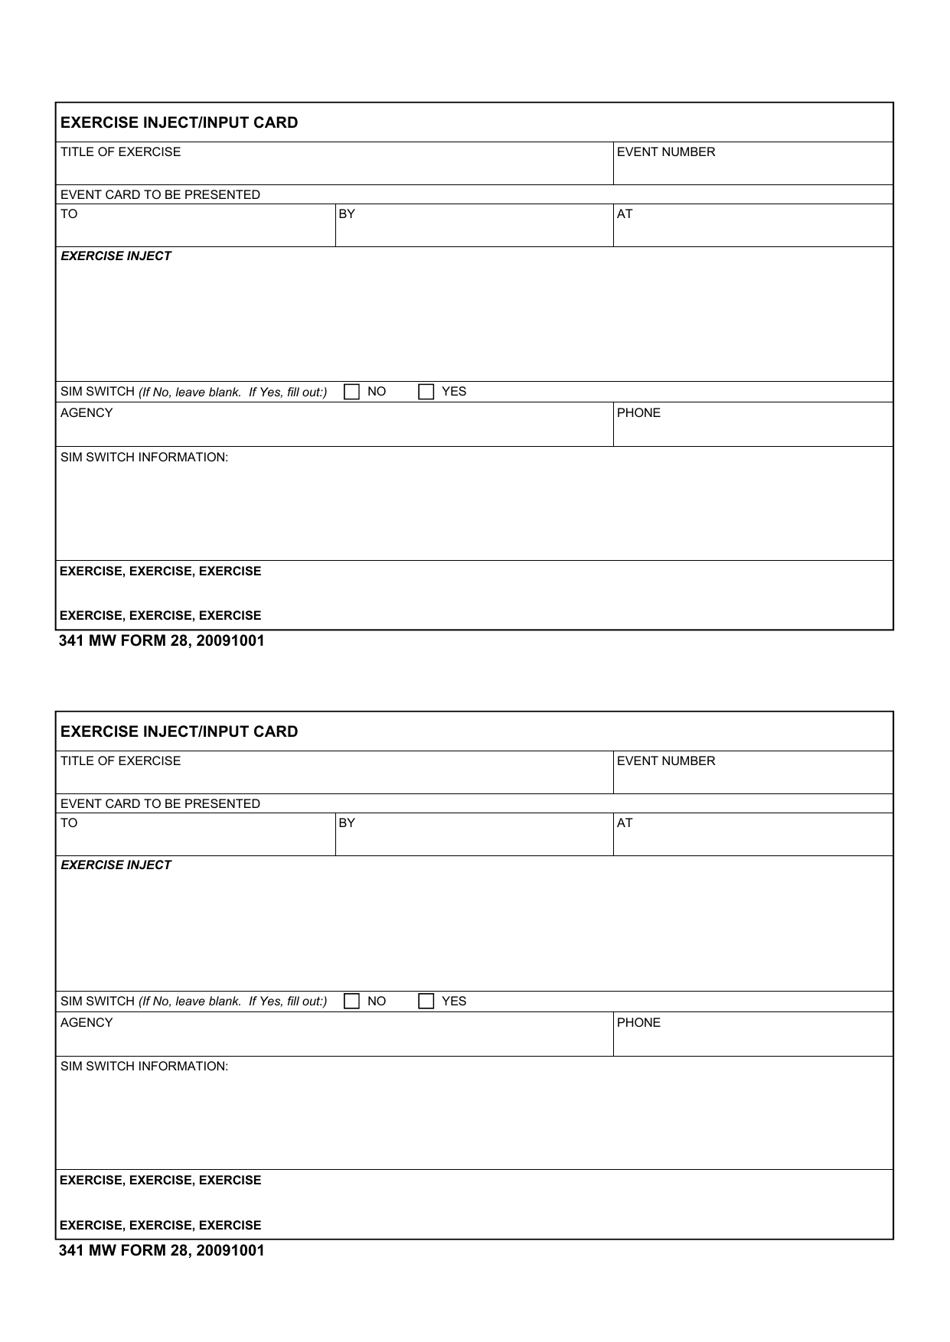 341 MW Form 28 Exercise Inject / Input Card, Page 1